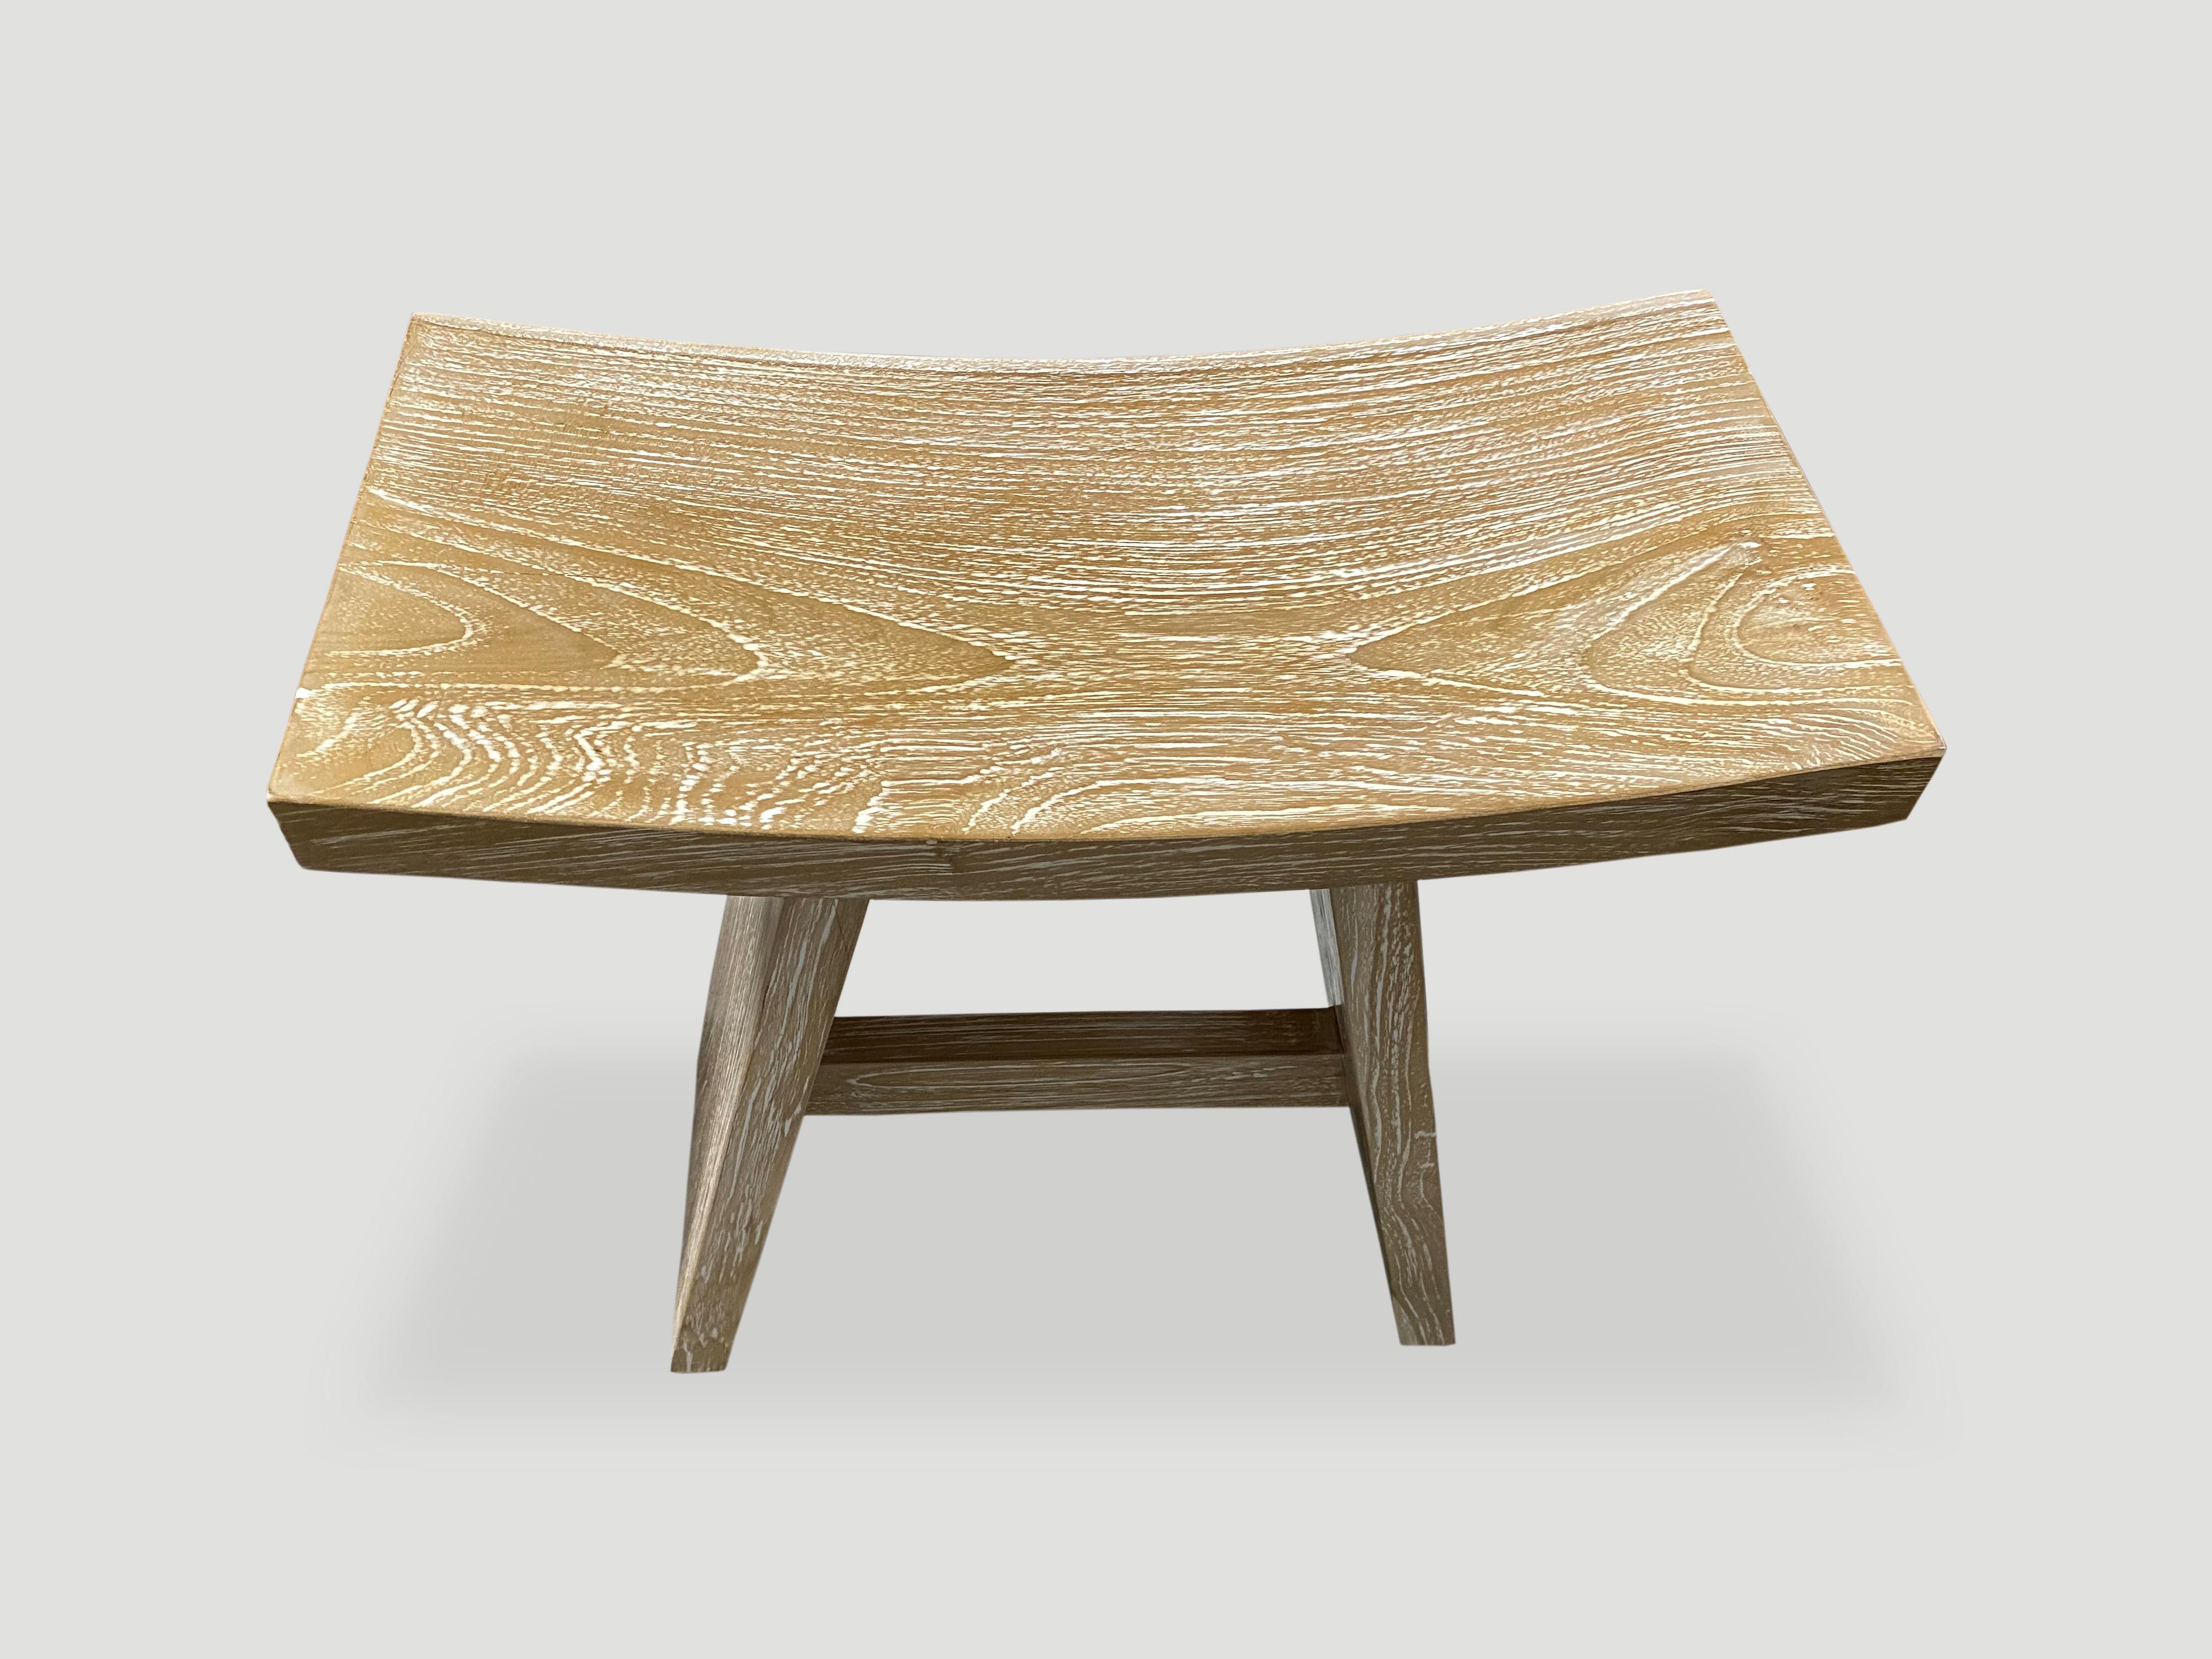 Reclaimed teak bench represents a modern, Minimalist aesthetic Perfect anywhere from a bathroom, kitchen or bedroom. The top section is made from a single teak slab. We added a light cerused finish which enhances the grain of the wood. Custom stains